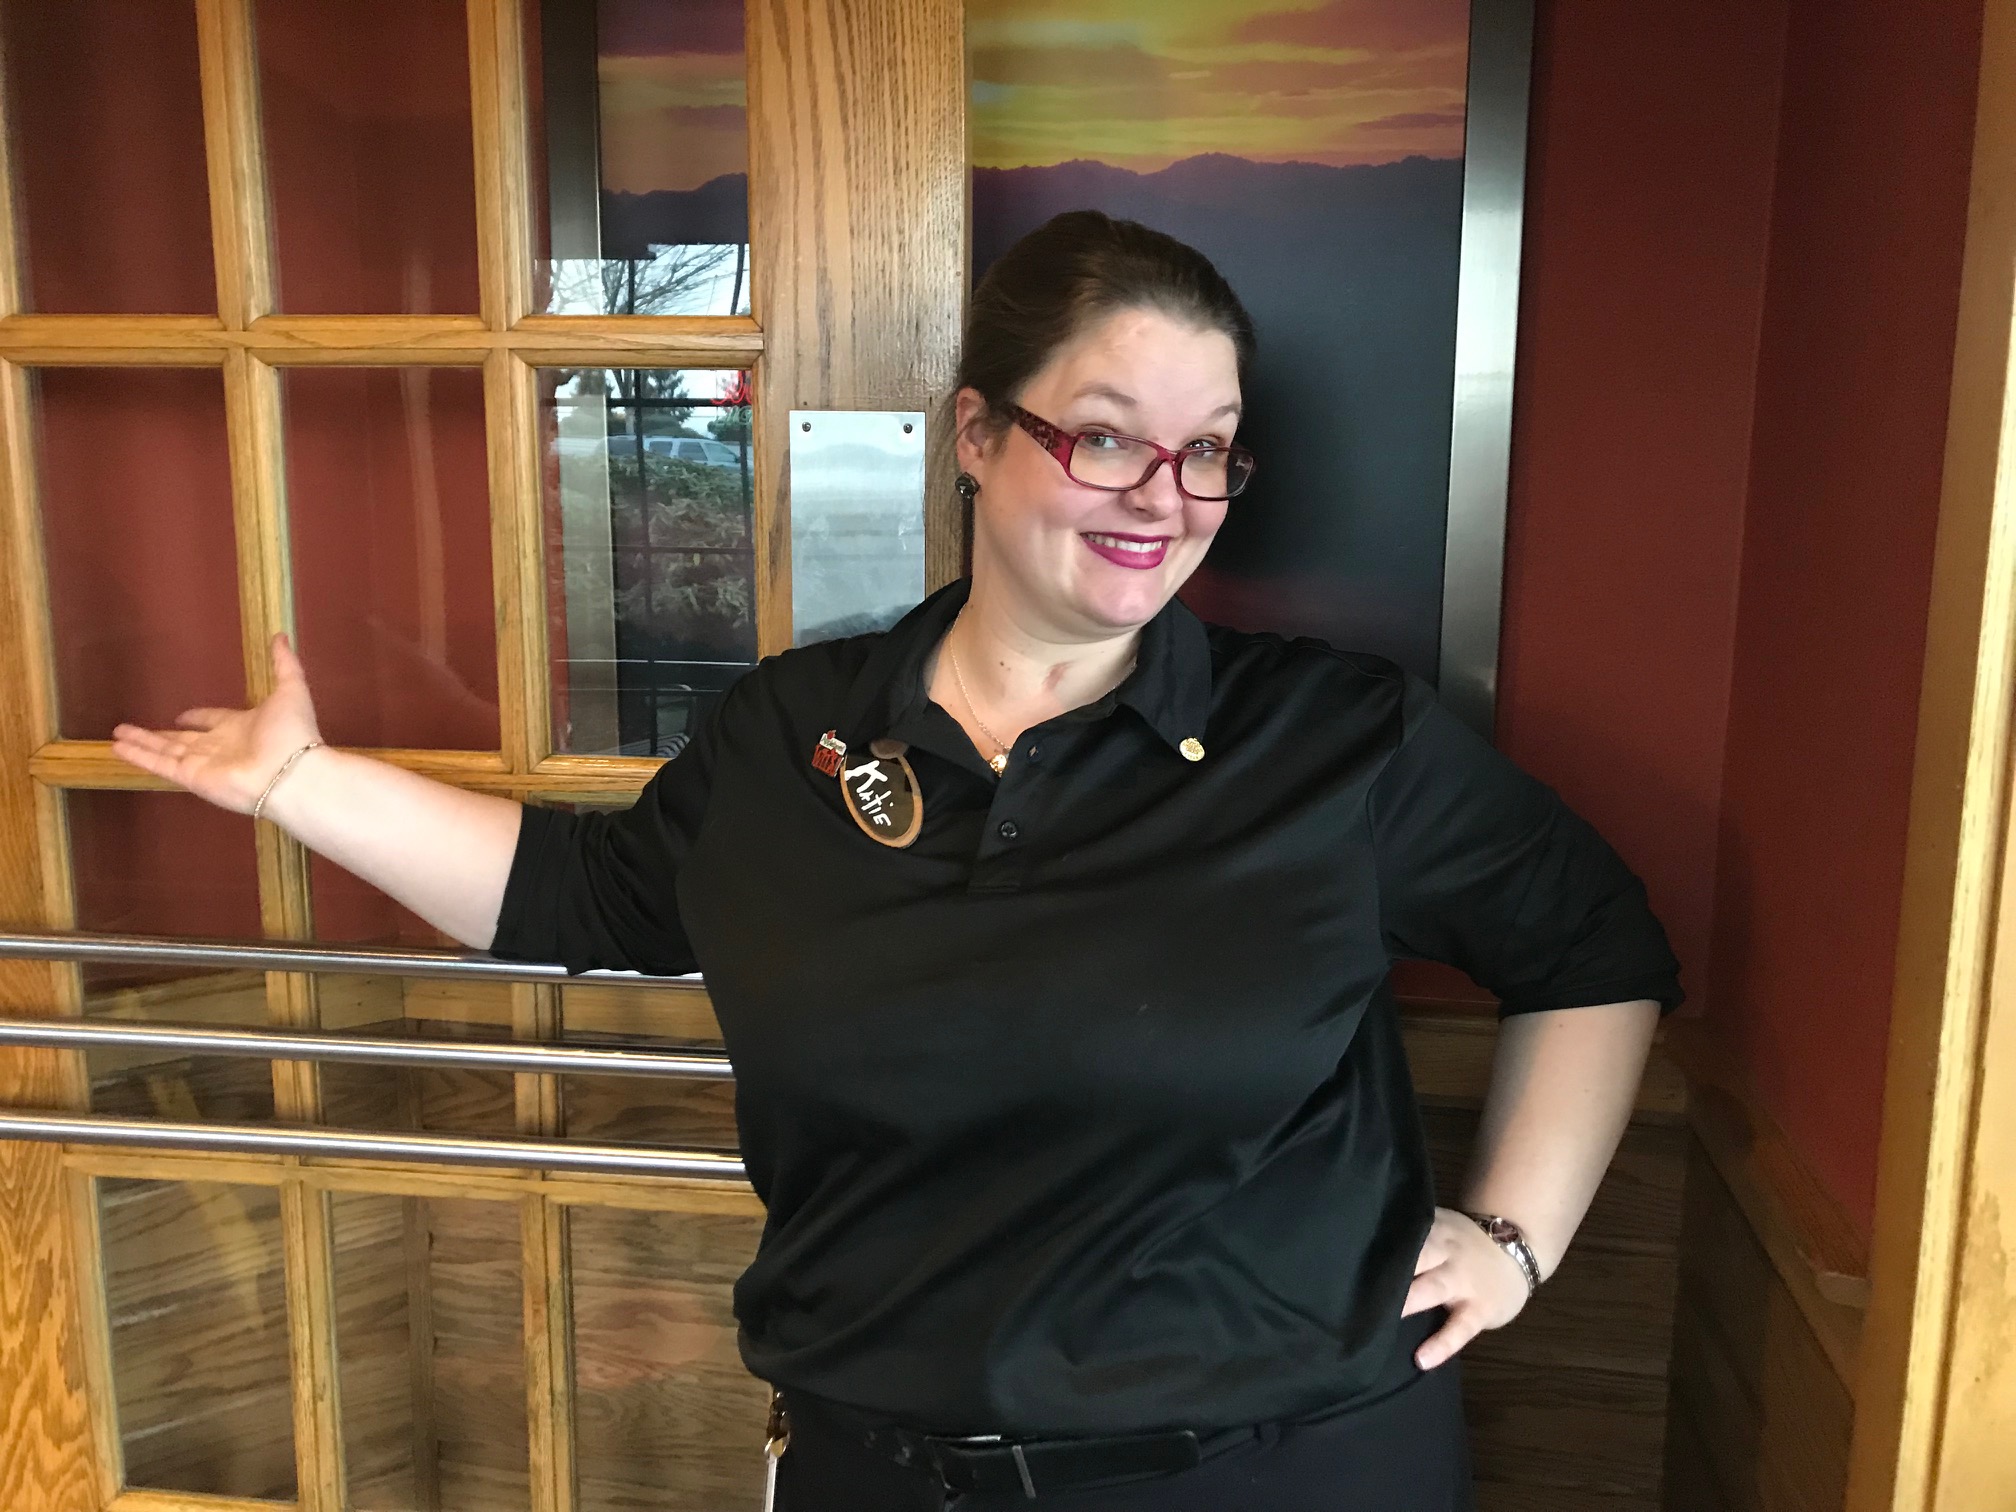 Image: Woman holding a door open and smiling with her right arm showing the way into the door. She wears a black Applebees uniform and name tag.